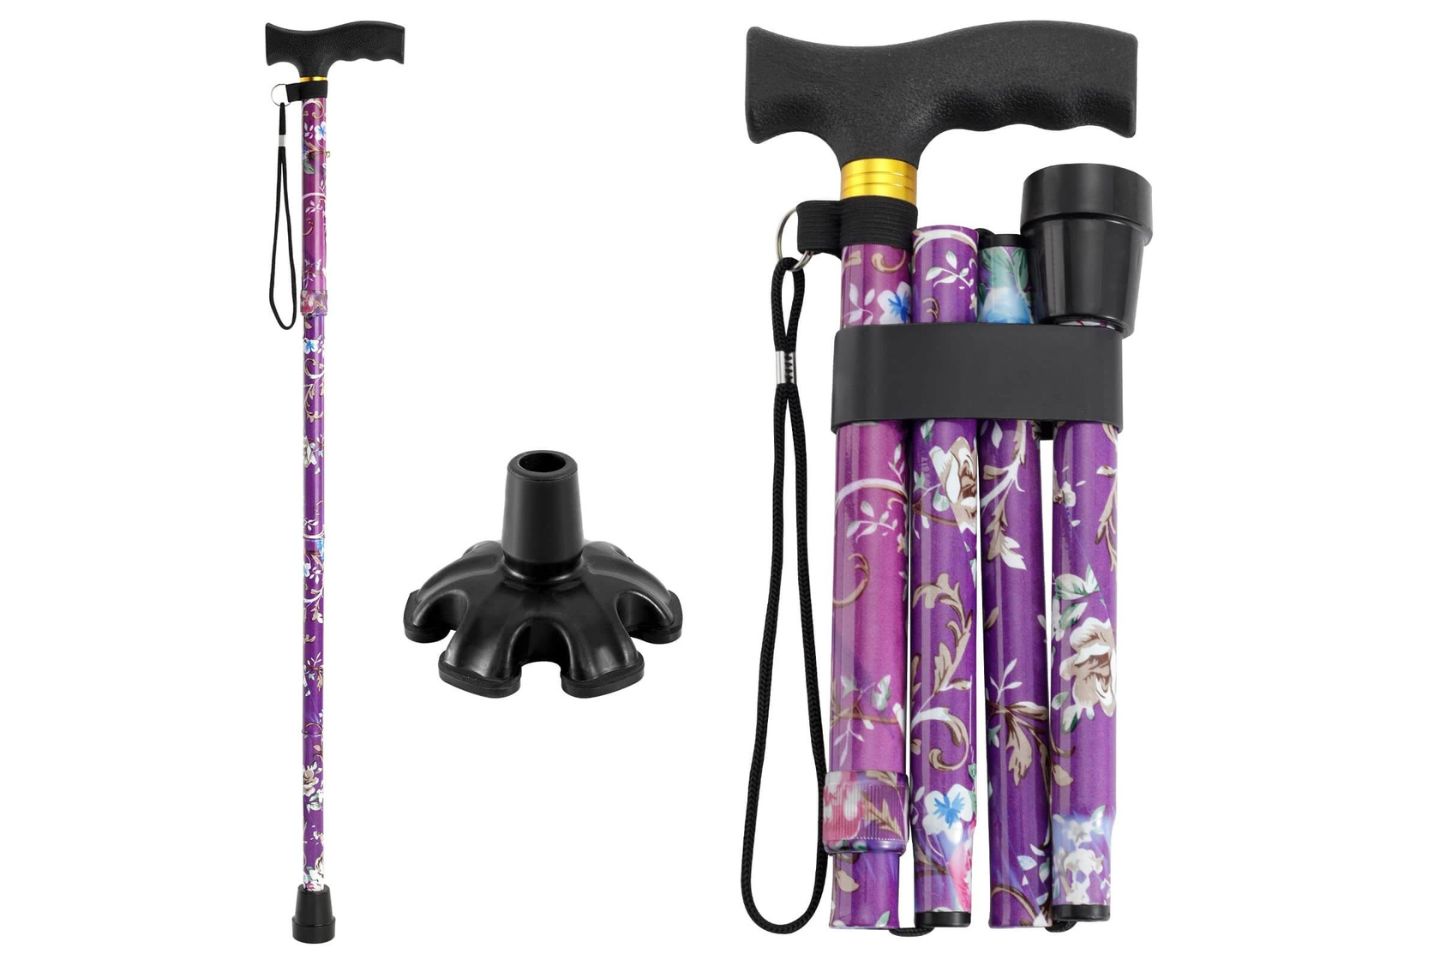 Top Five Ergonomic Walking Canes for Women - The Personal Injury